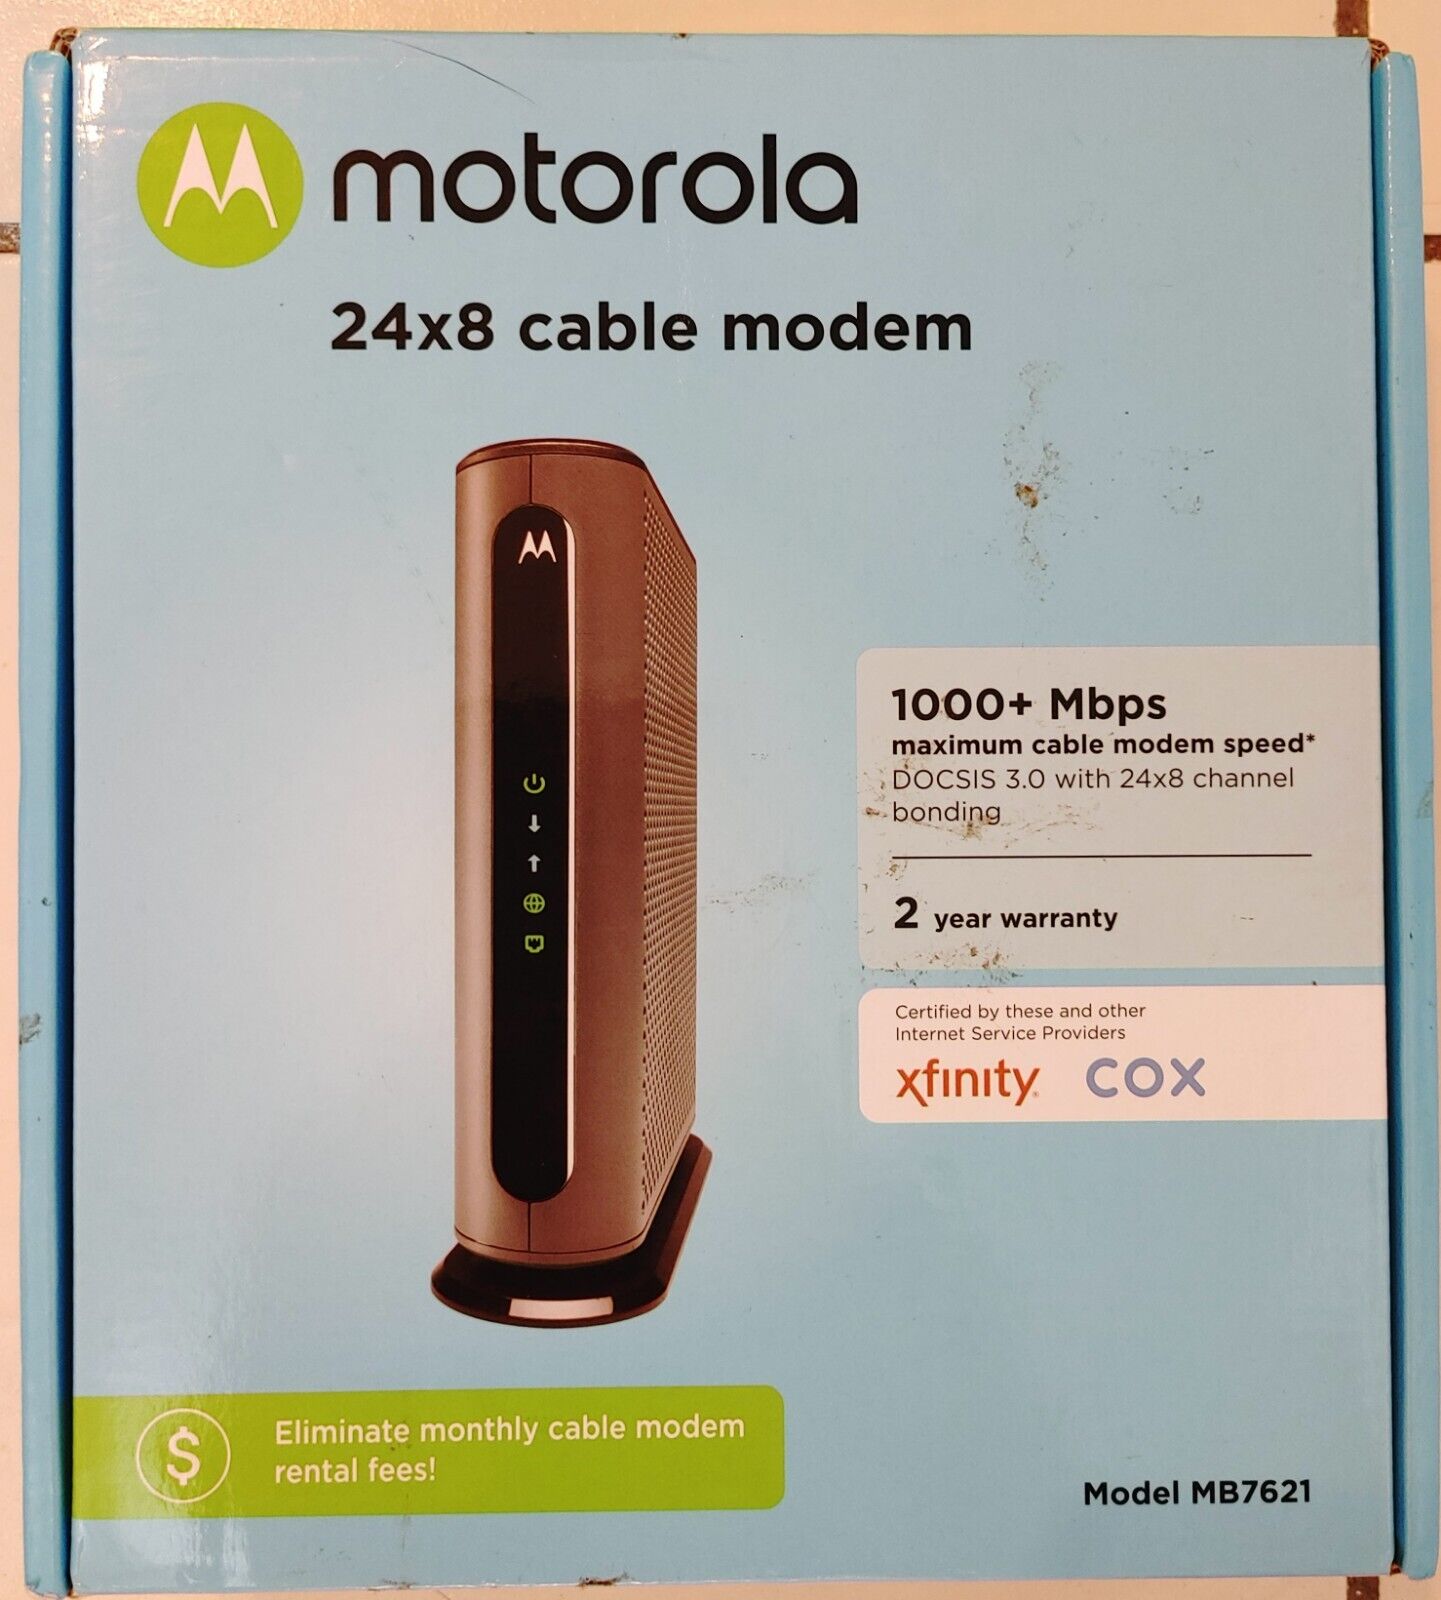 Motorola MB7621 Ethernet Cable Modem Pairs with Any WiFi Router Xfinity &Cox